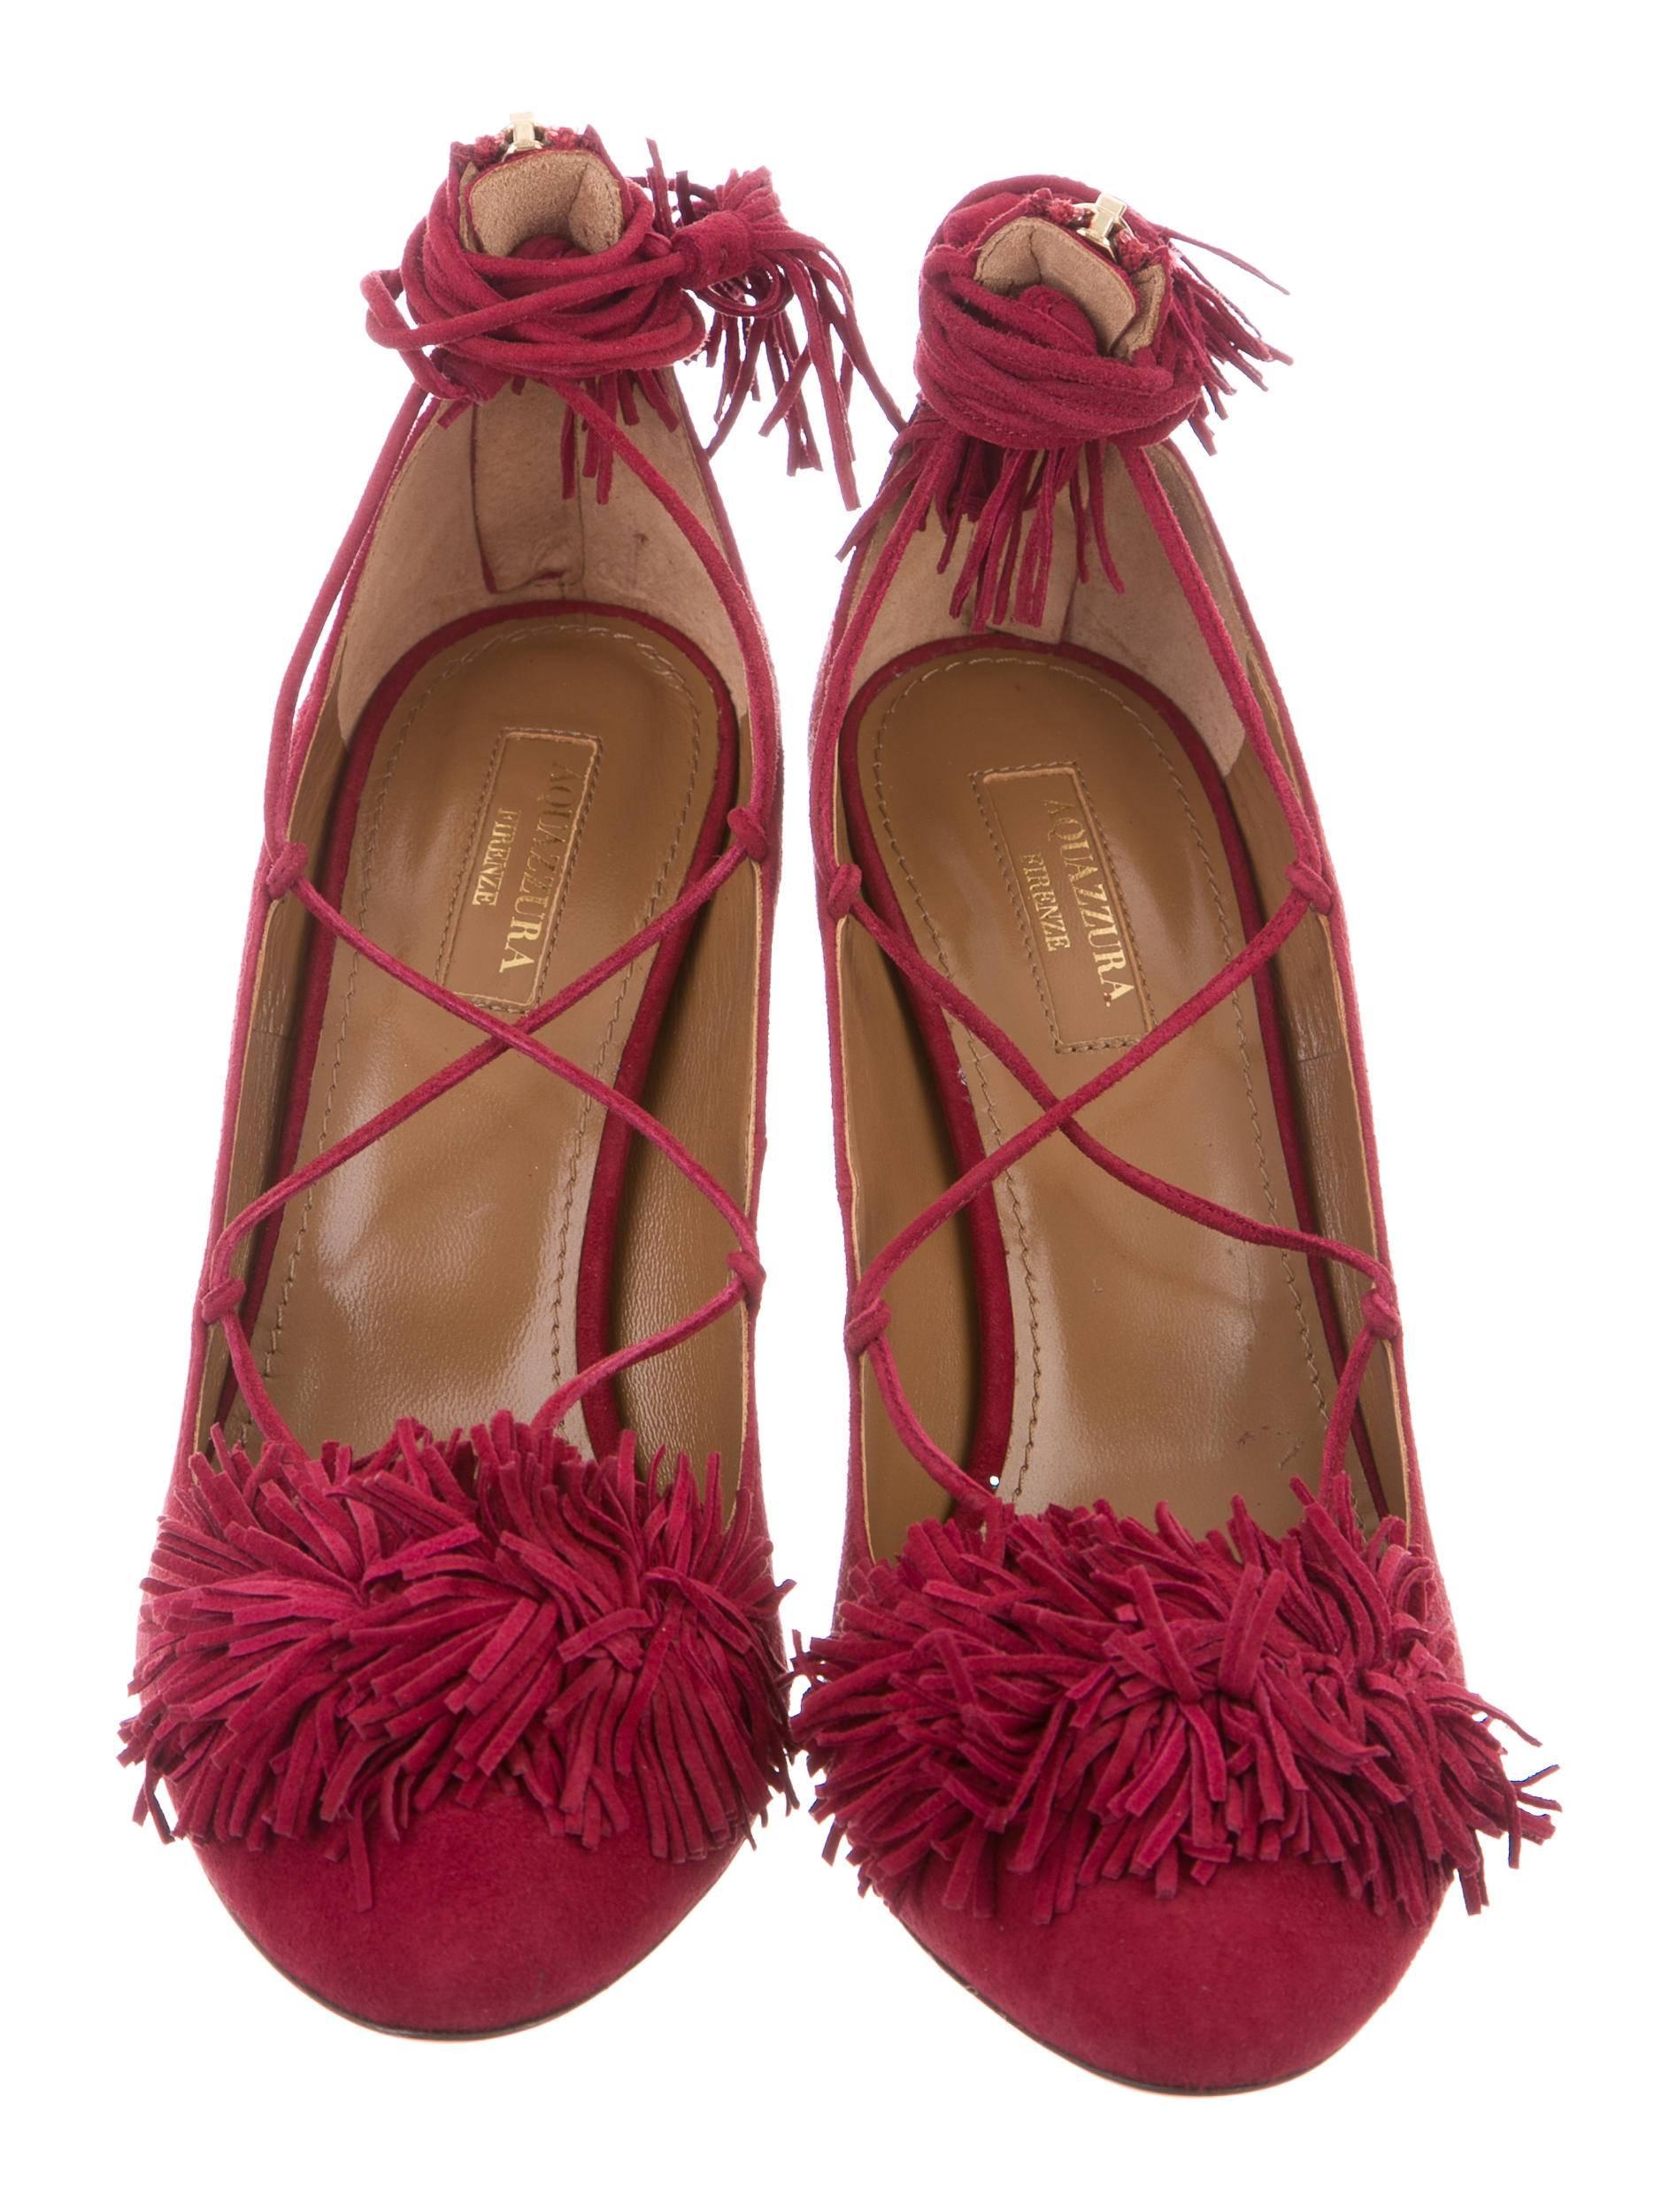 CURATOR'S NOTES

Aquazzura New Red Cashmere Suede Tassel Tie Up Sandals Pumps in Box 

Size IT 39
Suede
Zip and tie closure
Made in Italy
Heel height 3.5"
Includes original Aquazzura dust bag and box 
